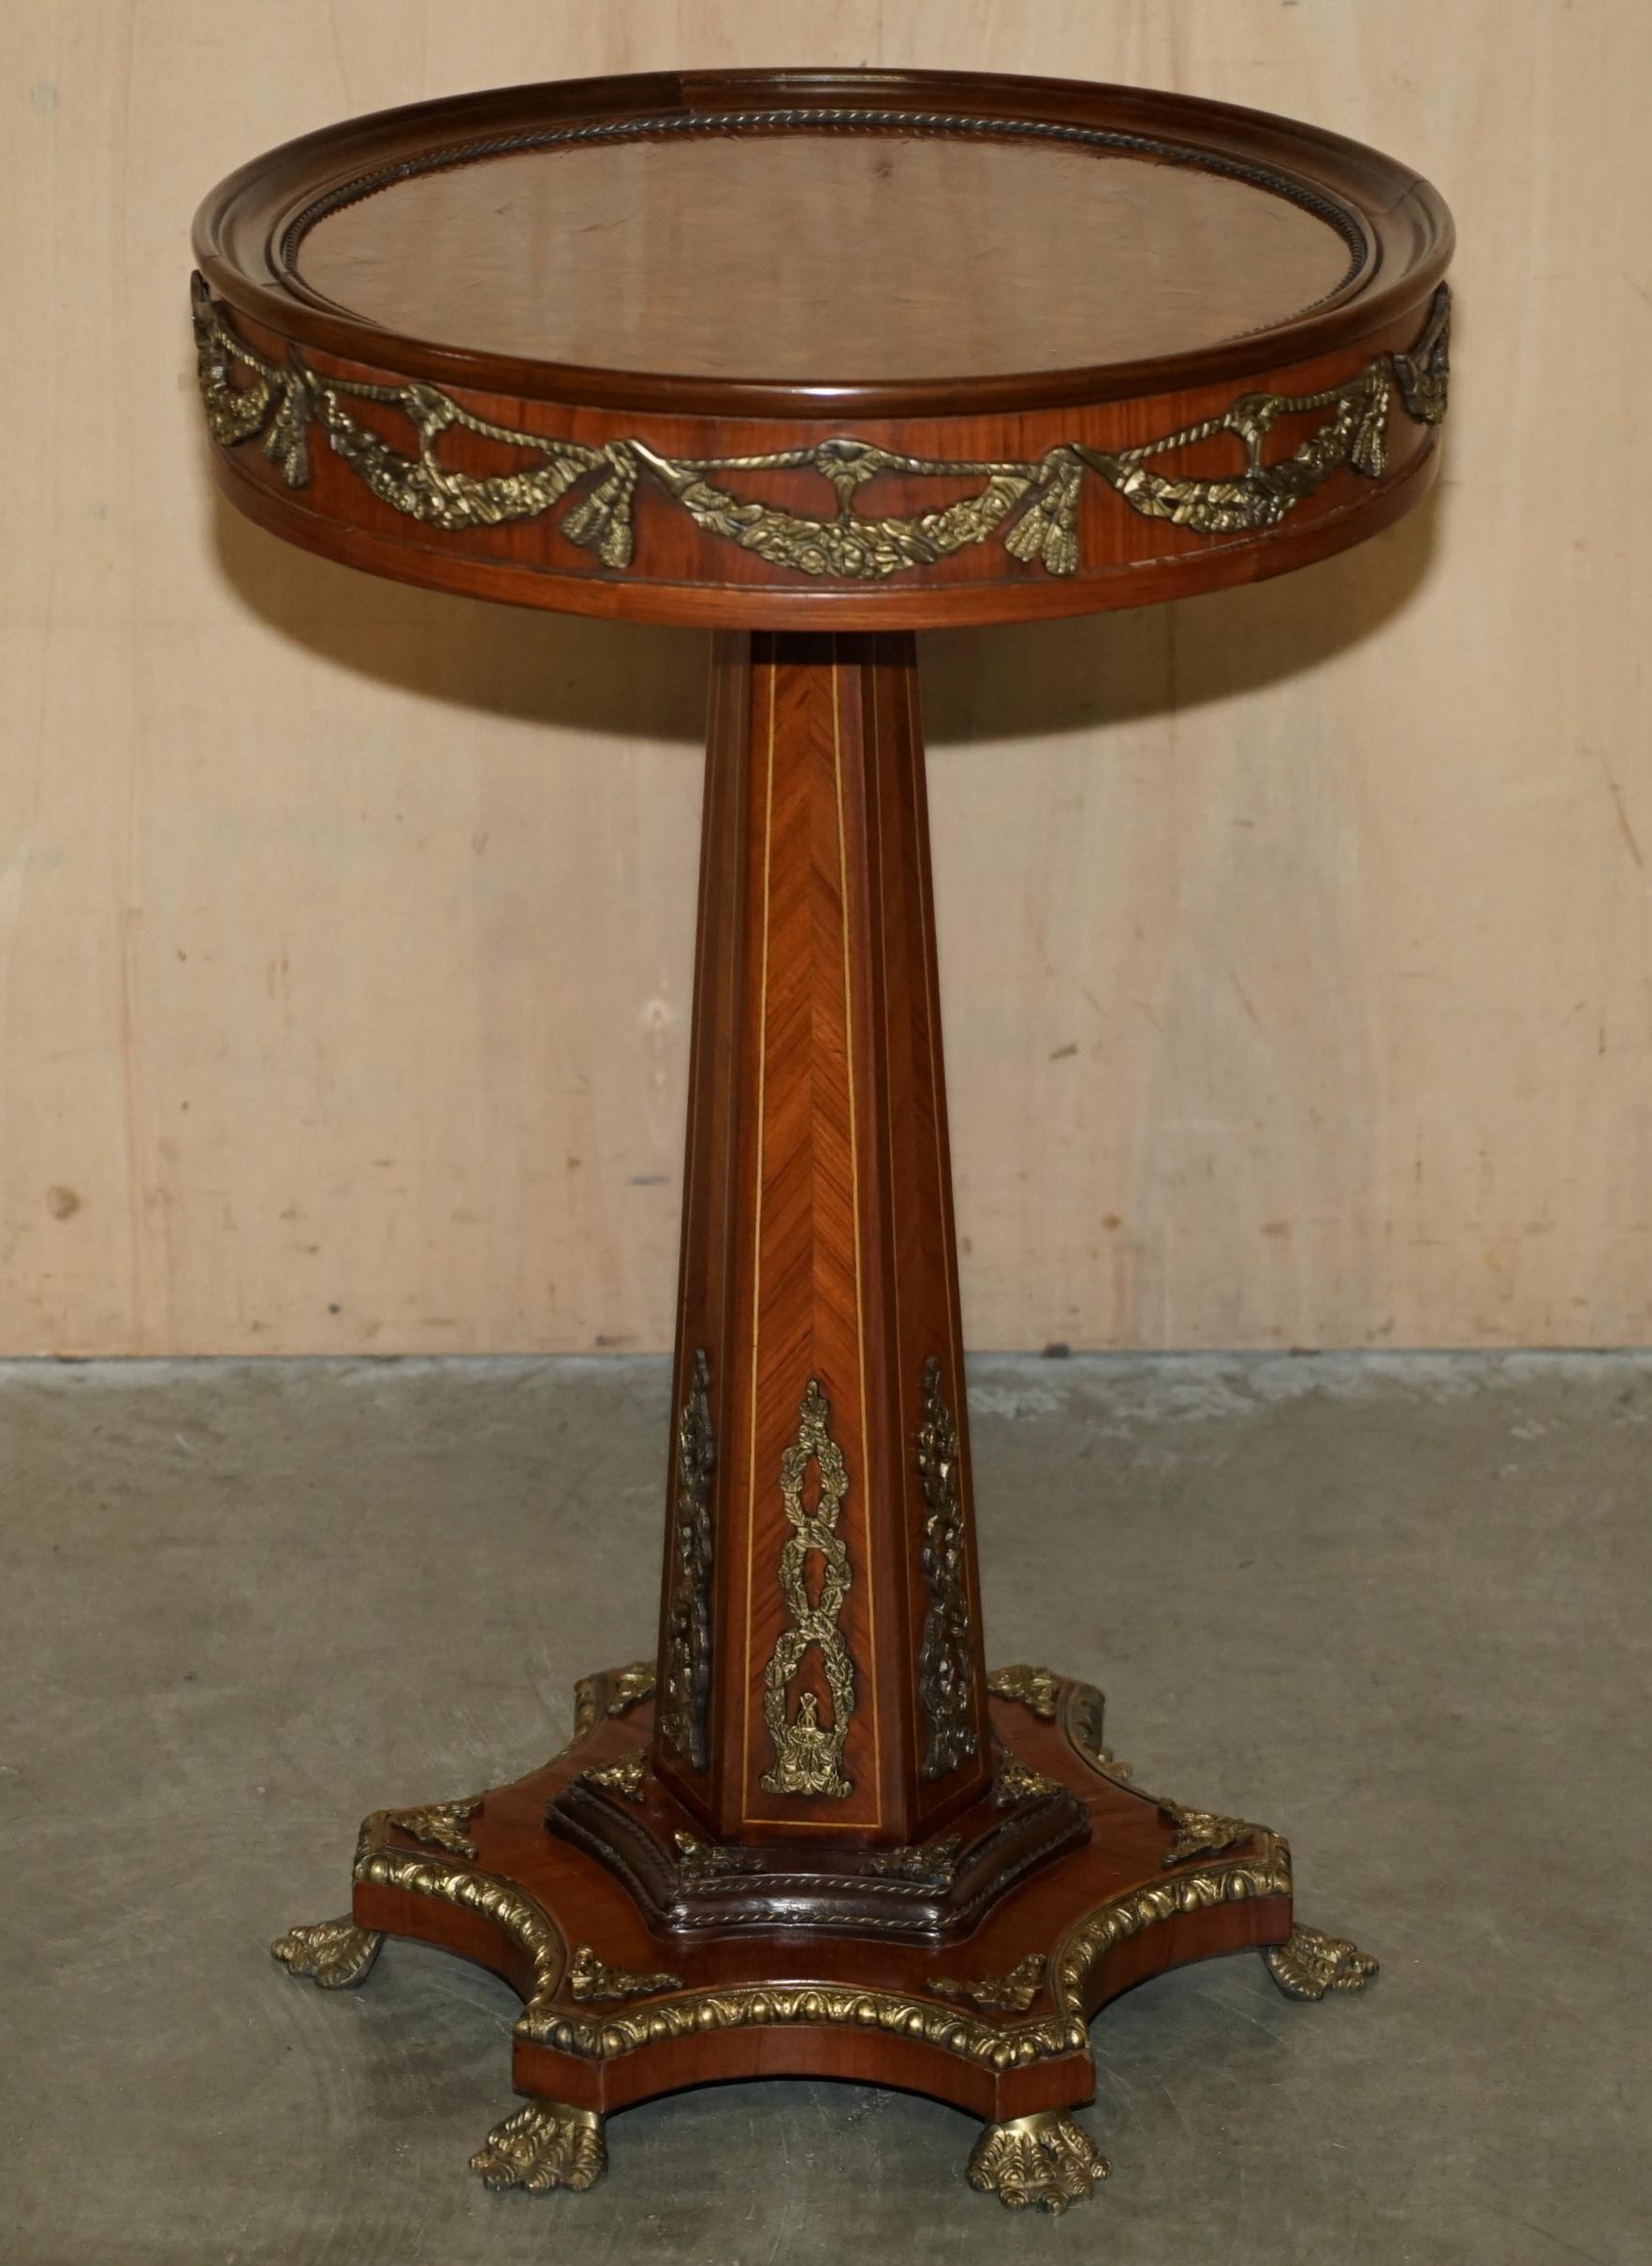 LOVELY PAiR OF FRENCH PARQUEtry WALNUT & GILT BRASS ROUND OCCASIONAL TABLES im Angebot 11